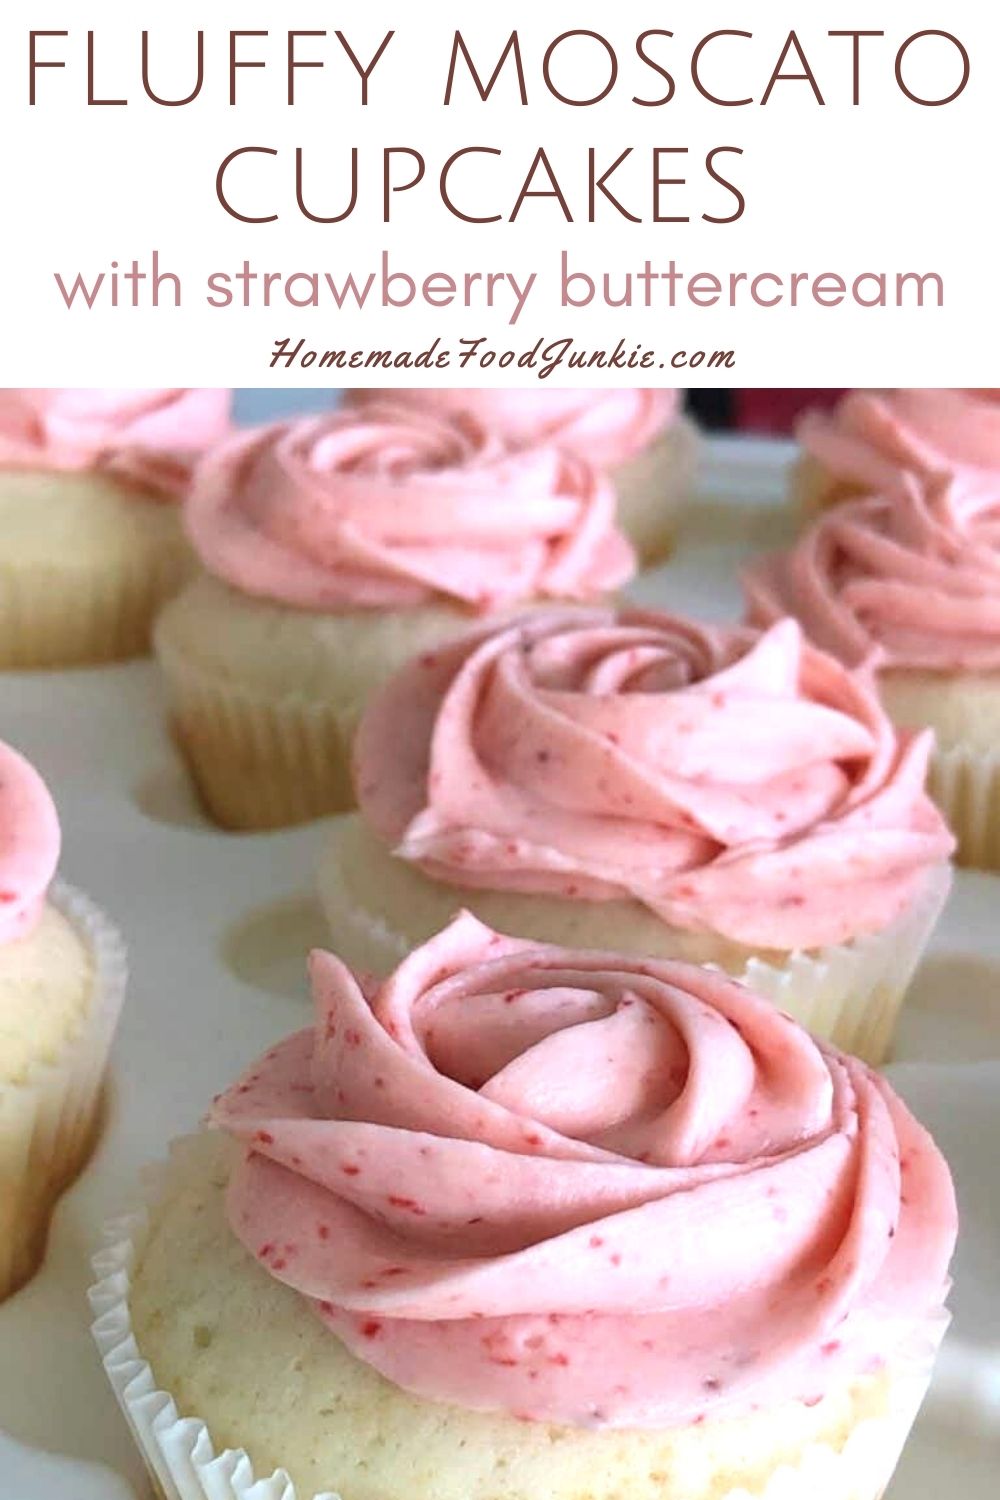 Fluffy Moscato Cupcakes With Strawberry Buttercream-Pin Image